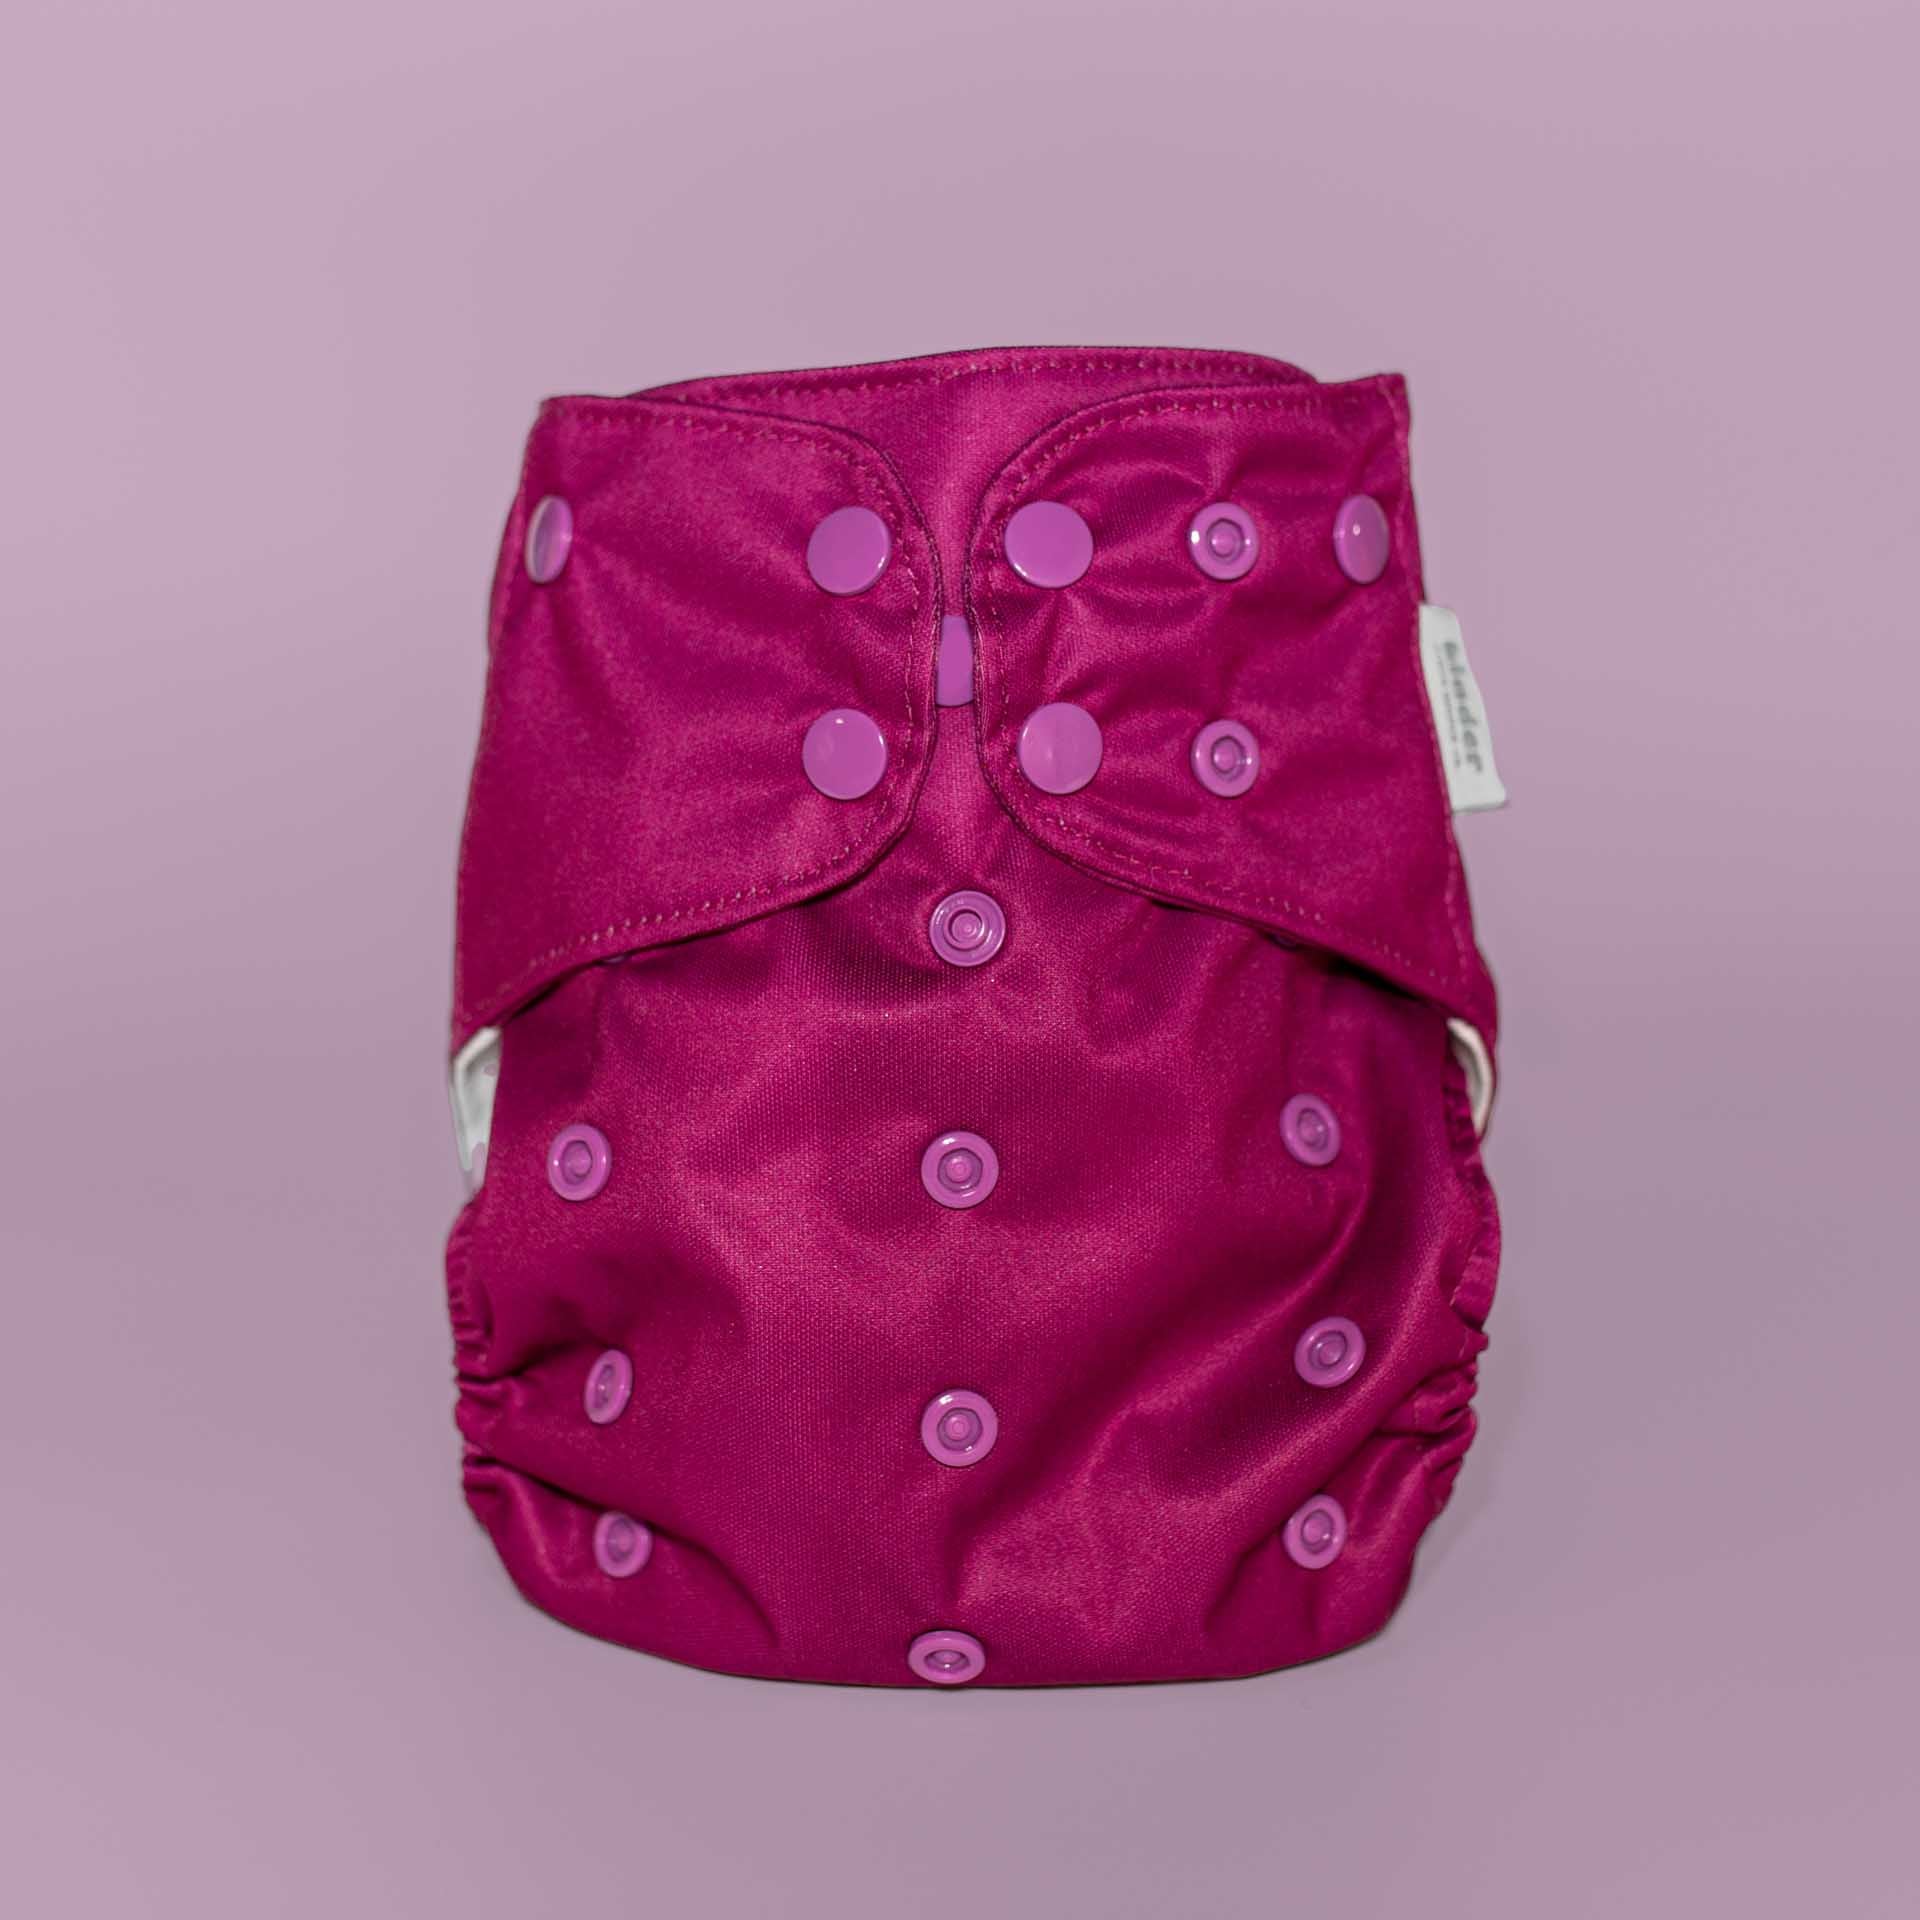 magenta pink purple best pocket style modern reusable cloth diaper cloth nappy kinder cloth diapers best pocket diapers pennsylvania small business quick shipping easy to clean ready to ship